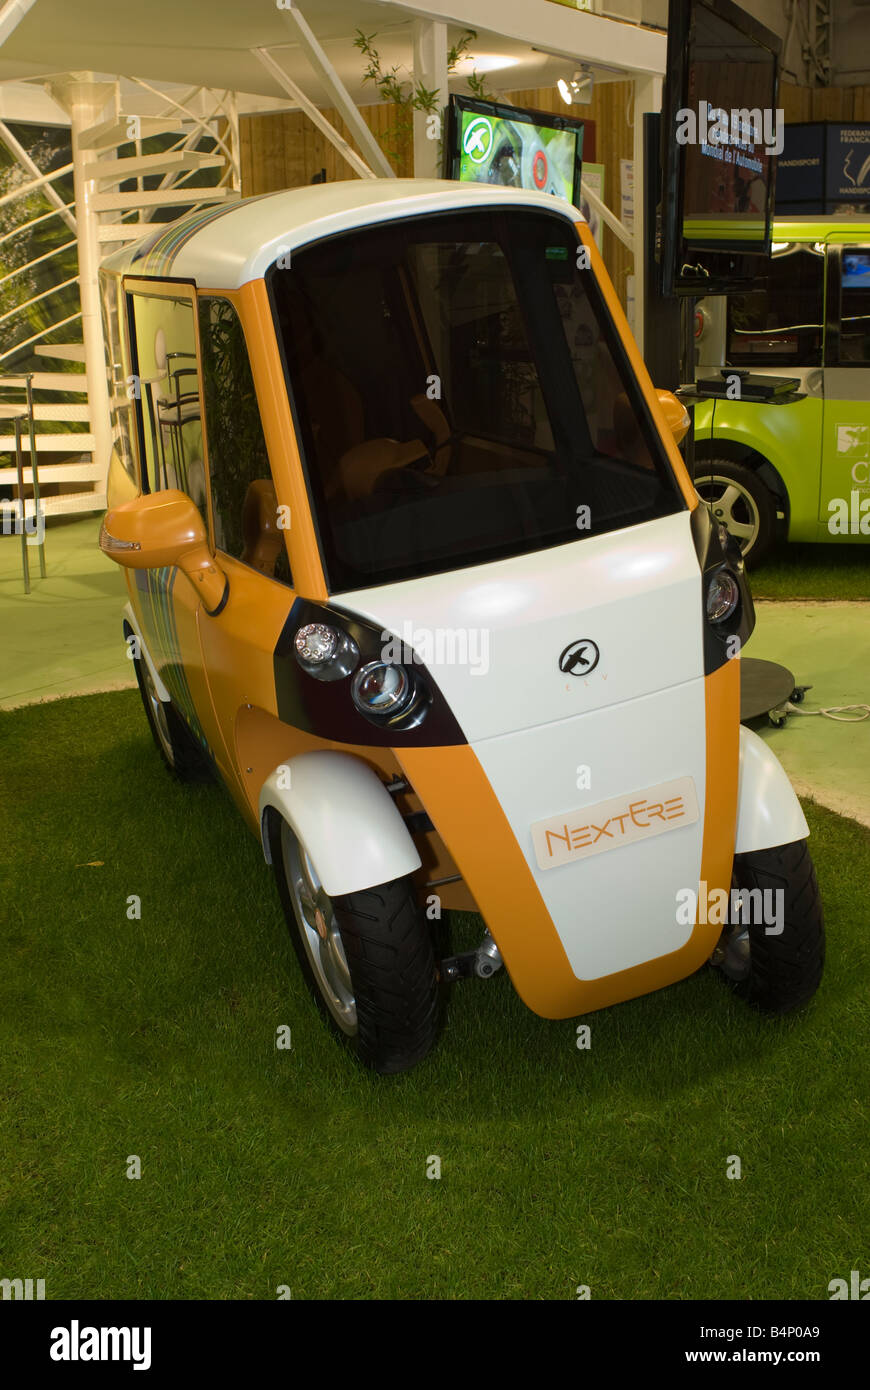 Paris France, micro cars French Electric Car &quot;Next Ere&quot; on Display Stock Photo - Alamy